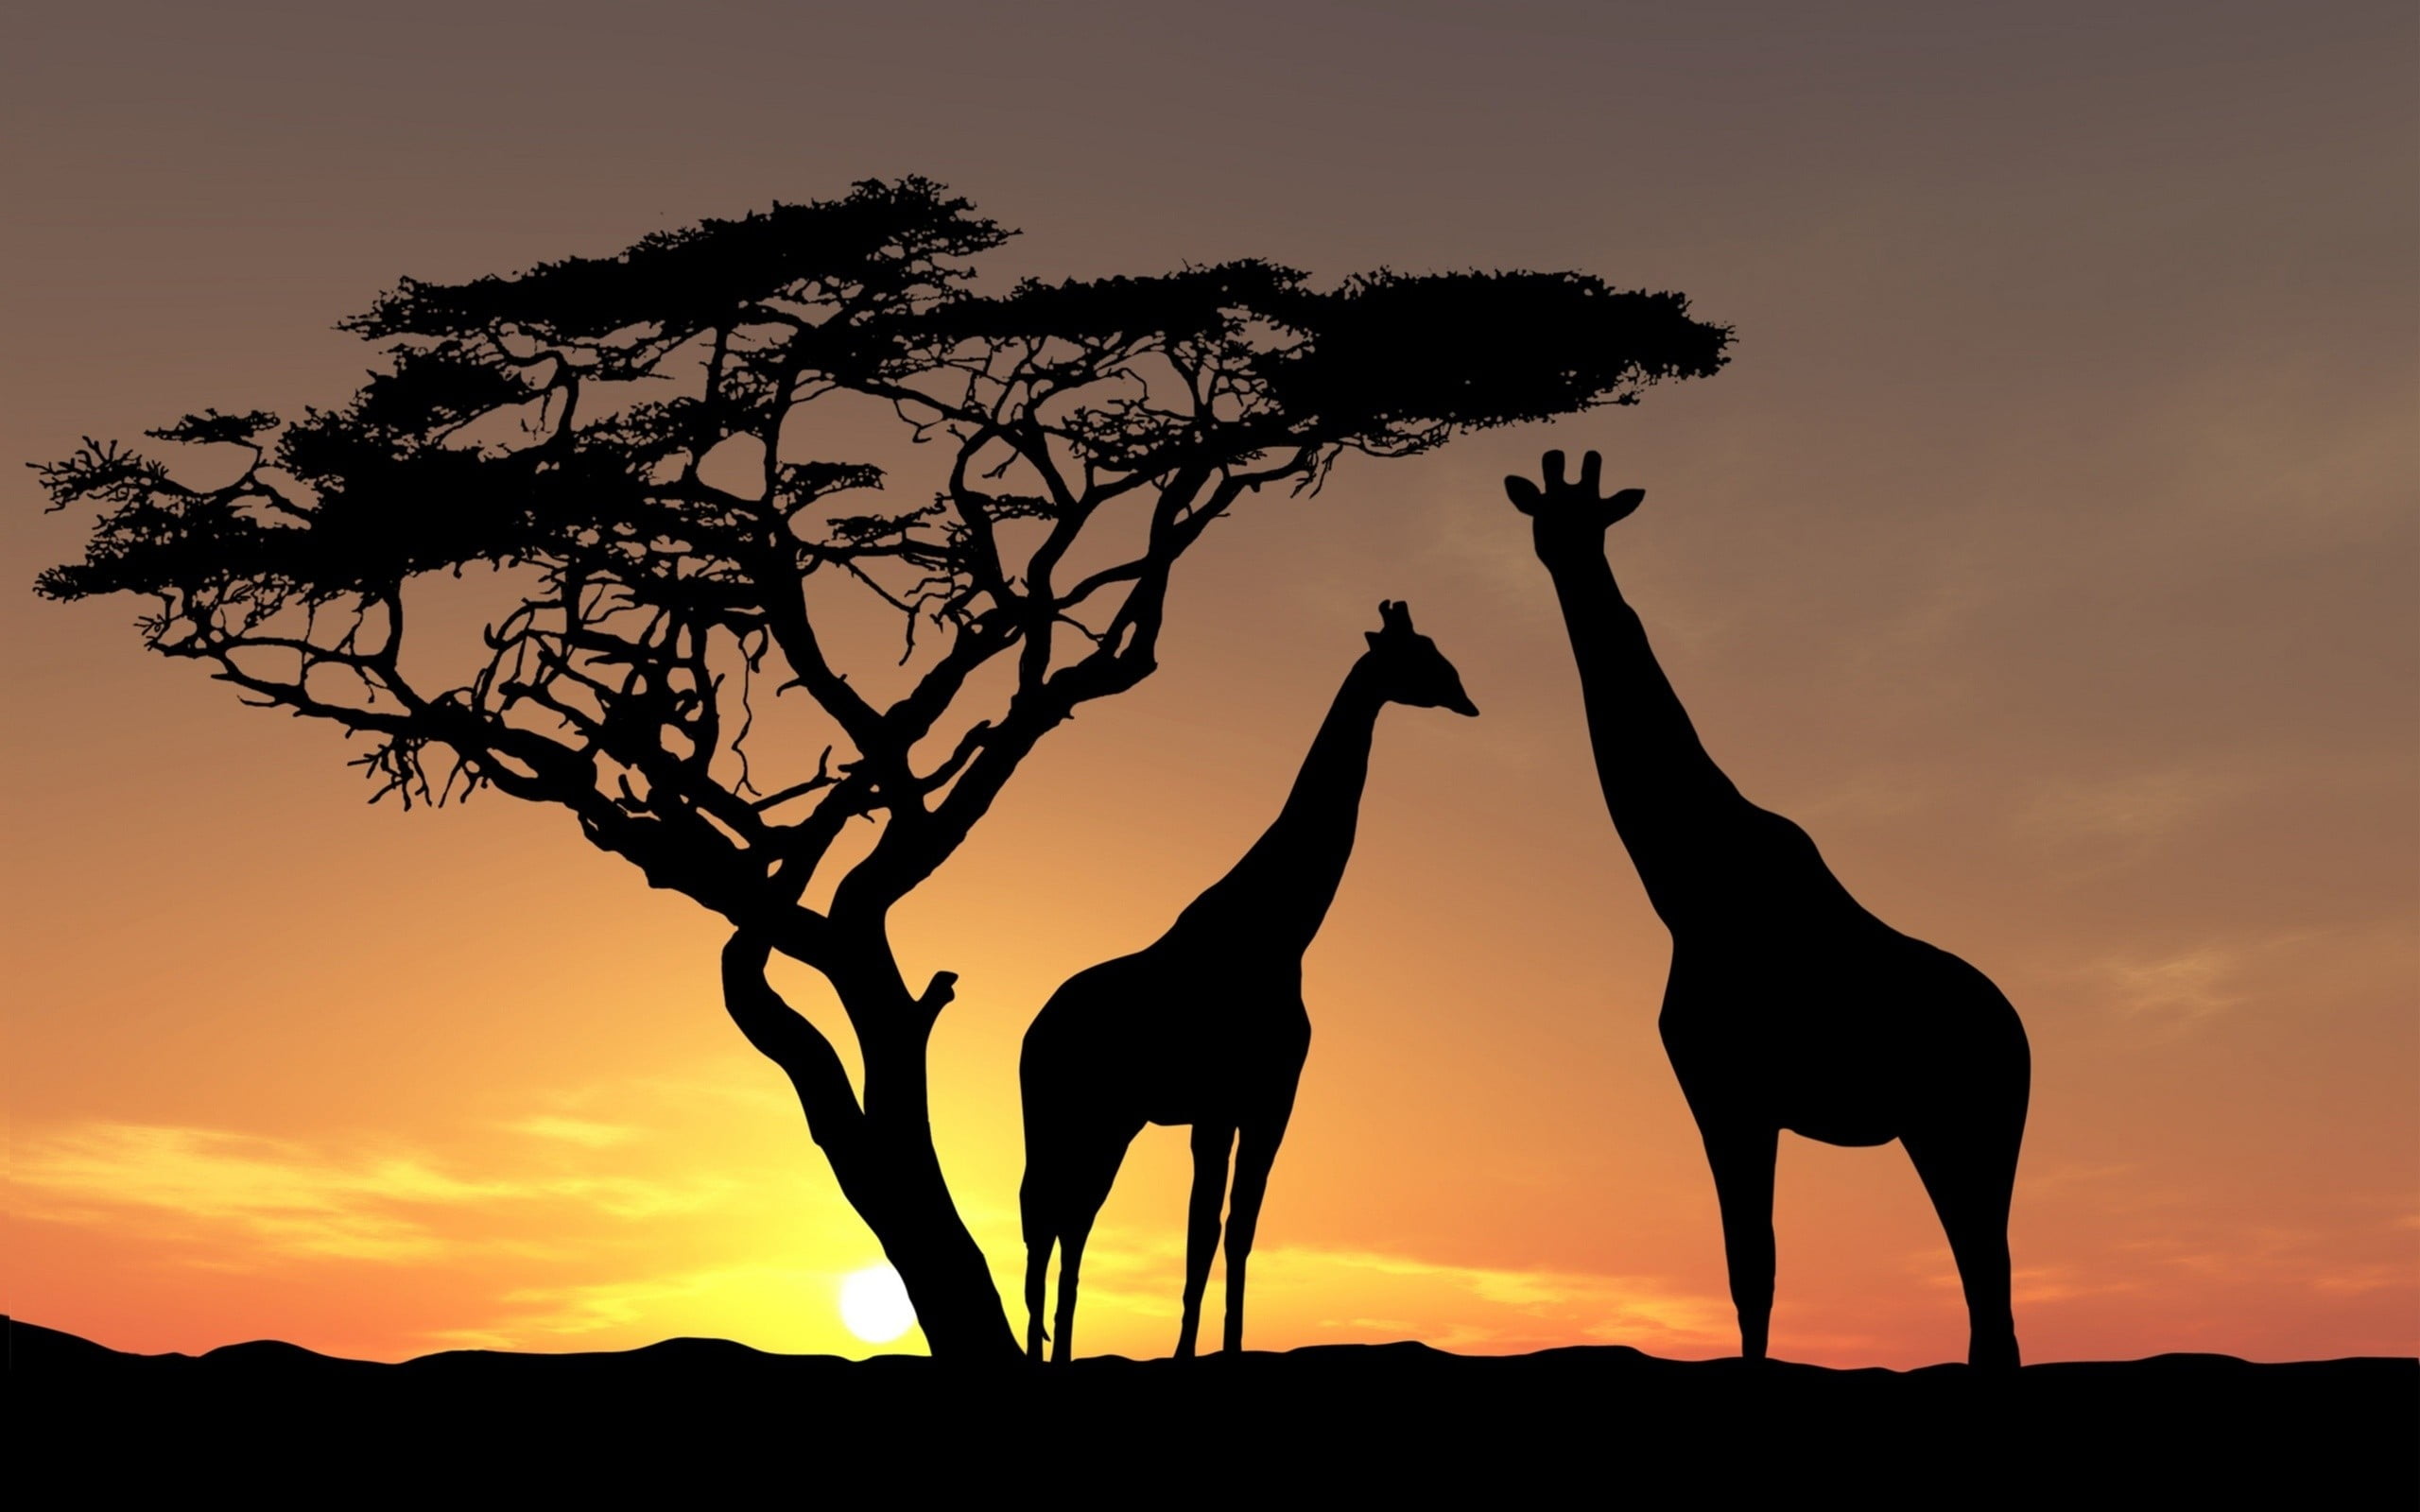 silhouette of giraffe beside the tree, nature, landscape, animals, trees